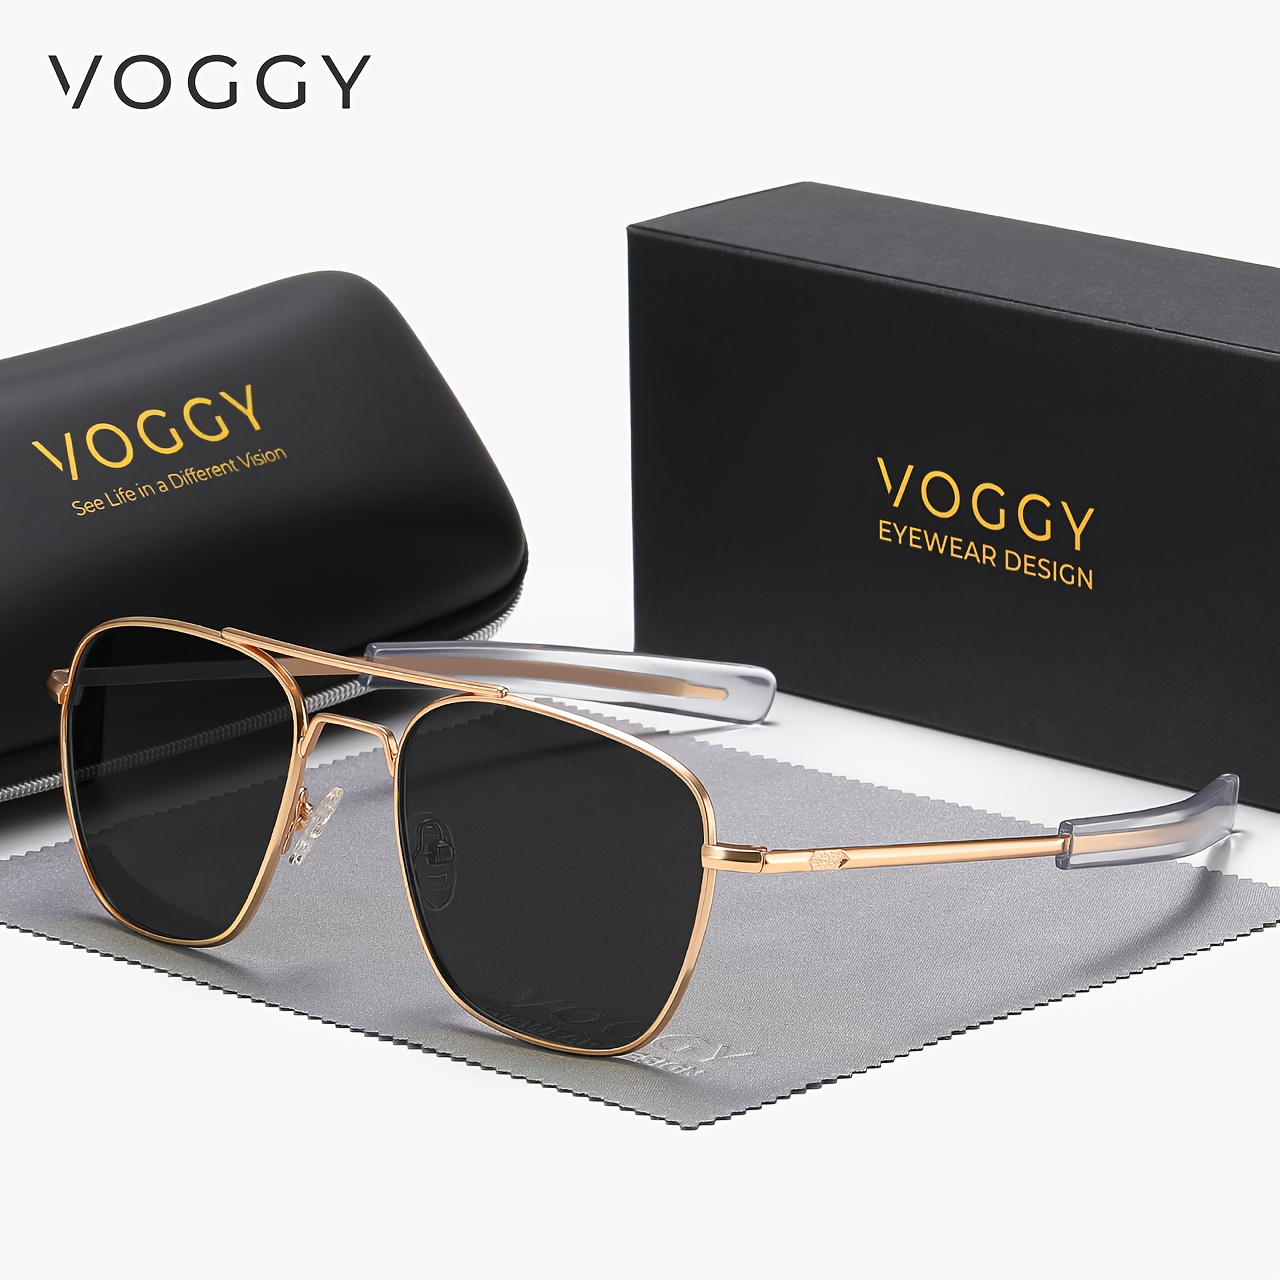 

Voggy Polarized Sunglasses For Women Men Vintage Mirrored Fashion Metal Sun Shades For Driving Beach Party With Gifts Box Mother's Day/give Gifts